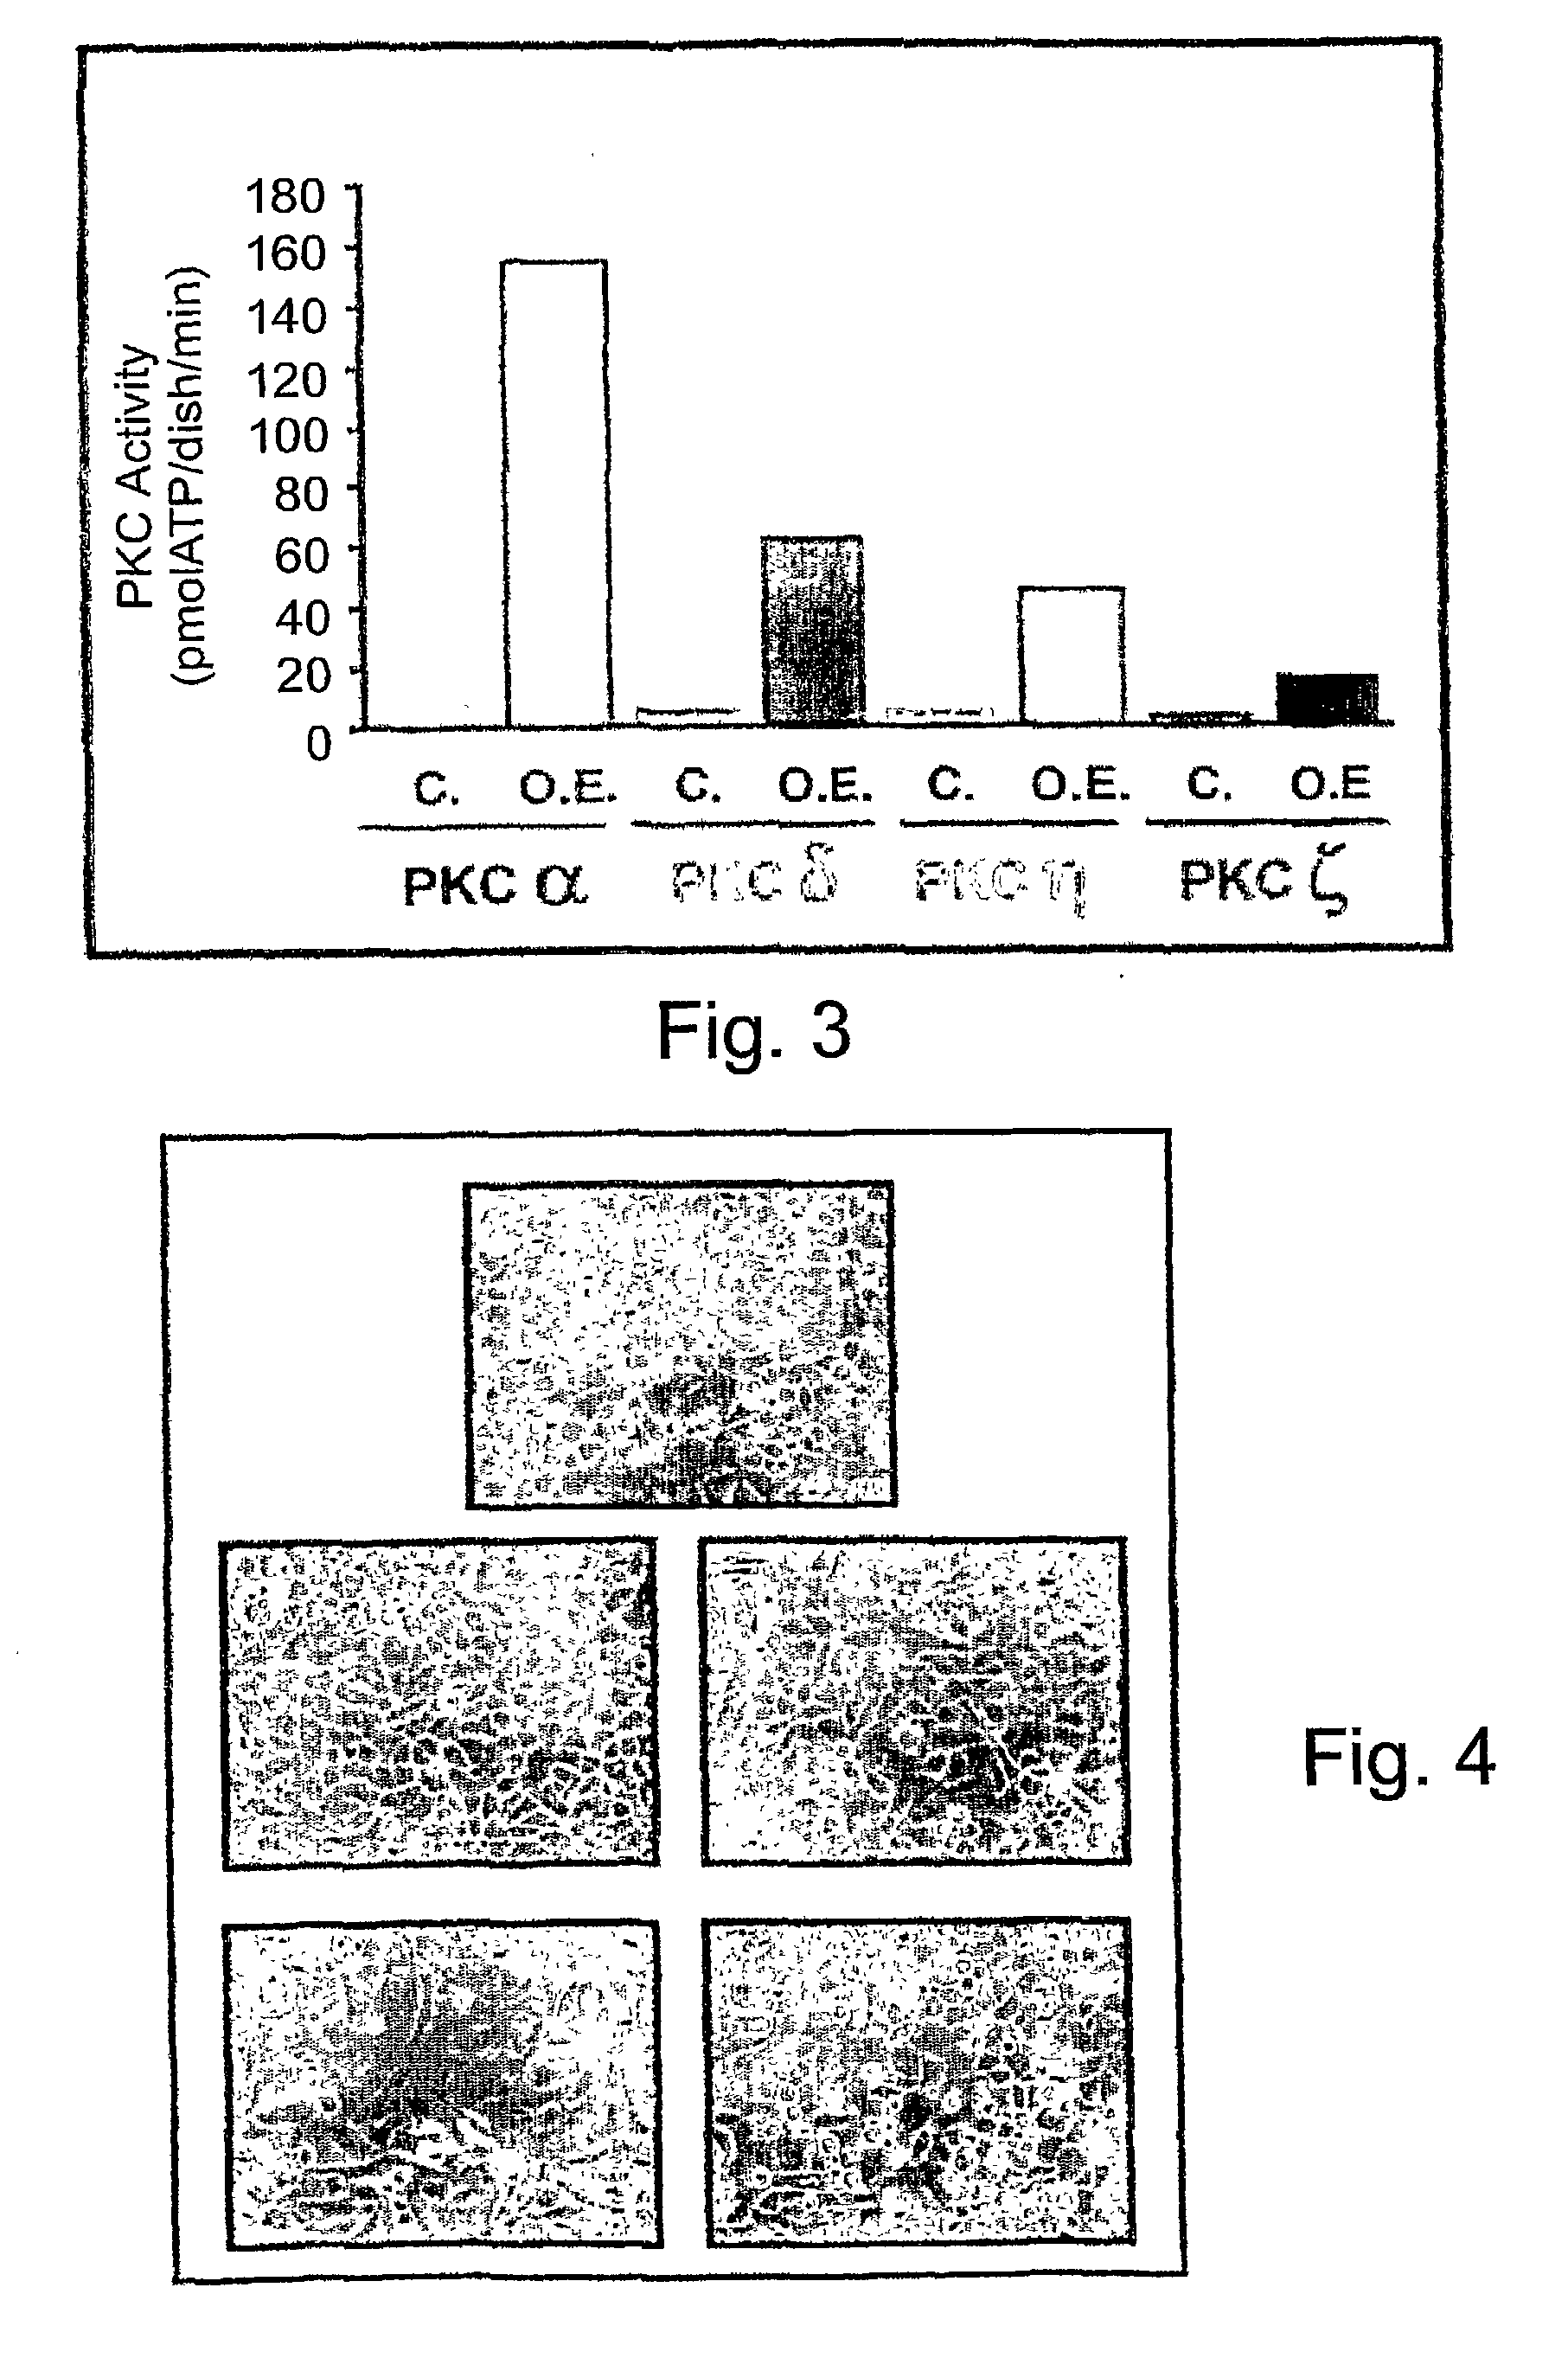 Methods and pharmaceutical compositions for healing wounds